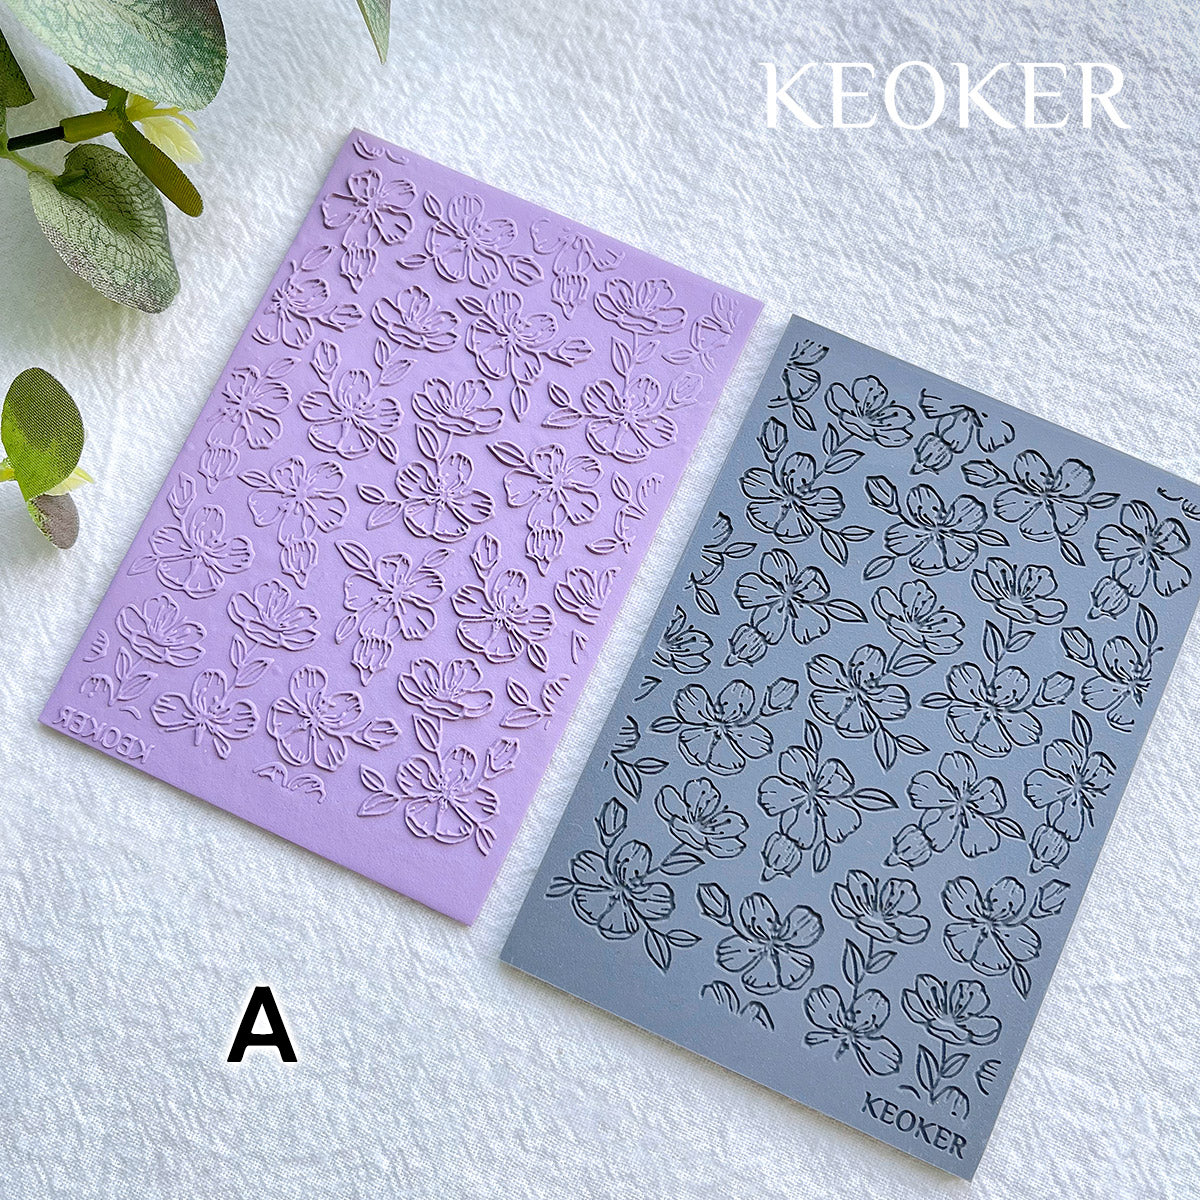 Keoker Polymer Clay Texture Sheets, Clay Texture Mat for Making Earrings  Jewerly, Polymer Clay Earrings Tools (No. 7-8)